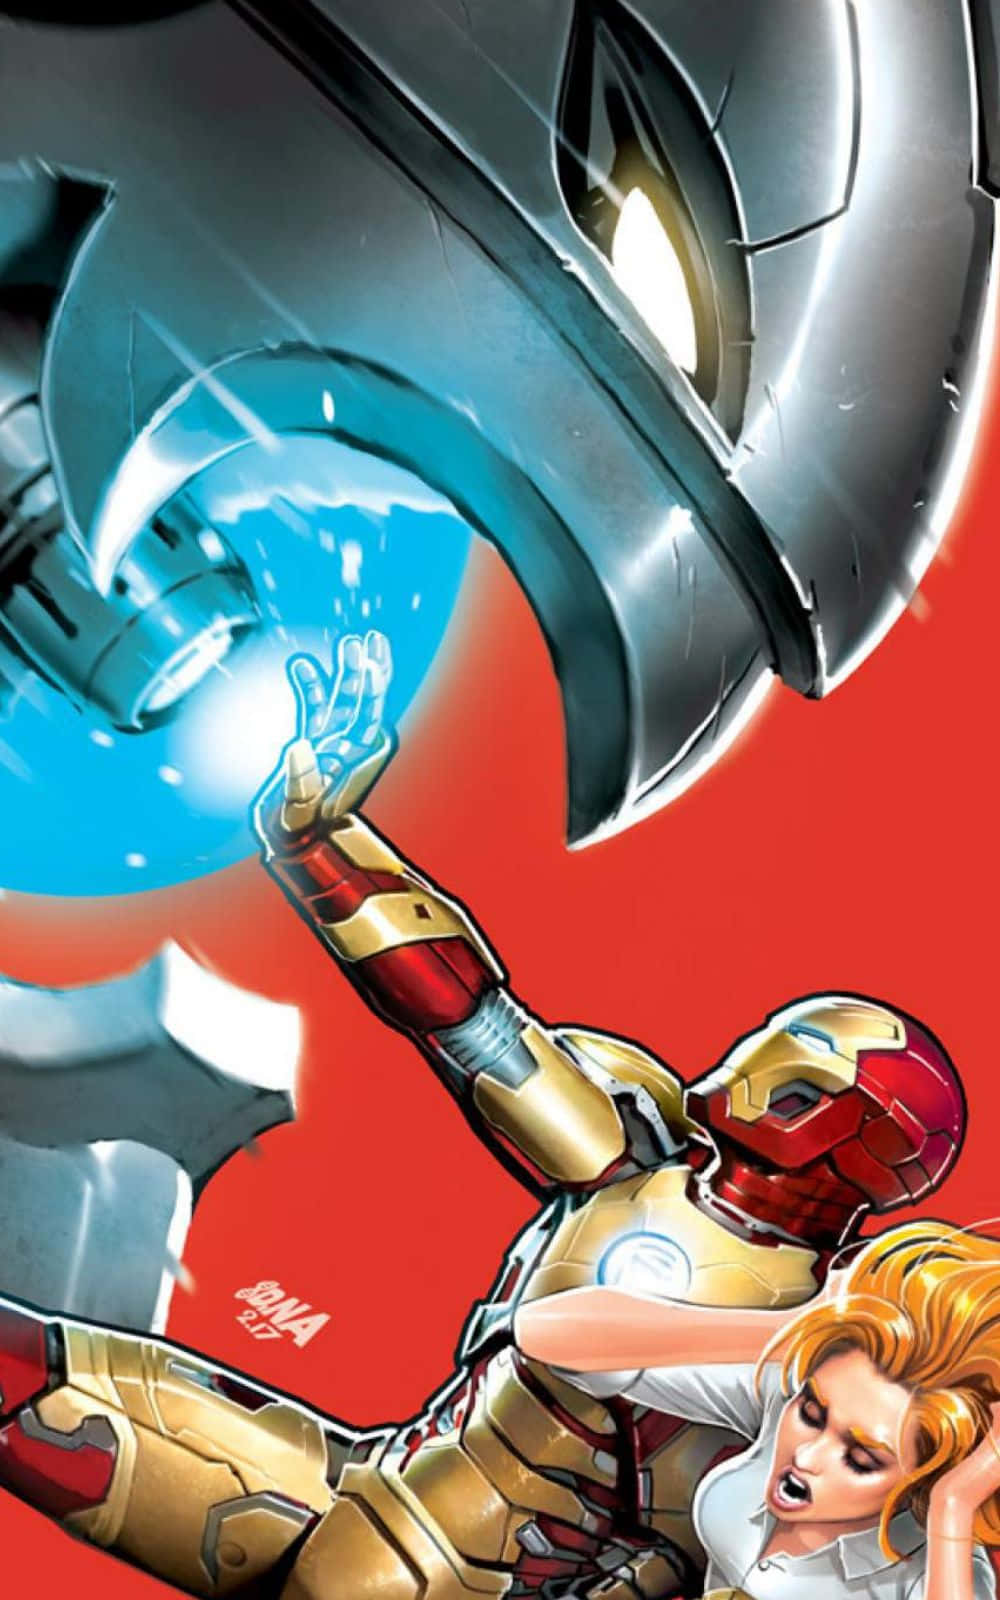 Two heavyweights of the Marvel universe face off - Iron Man vs Ultron. Wallpaper